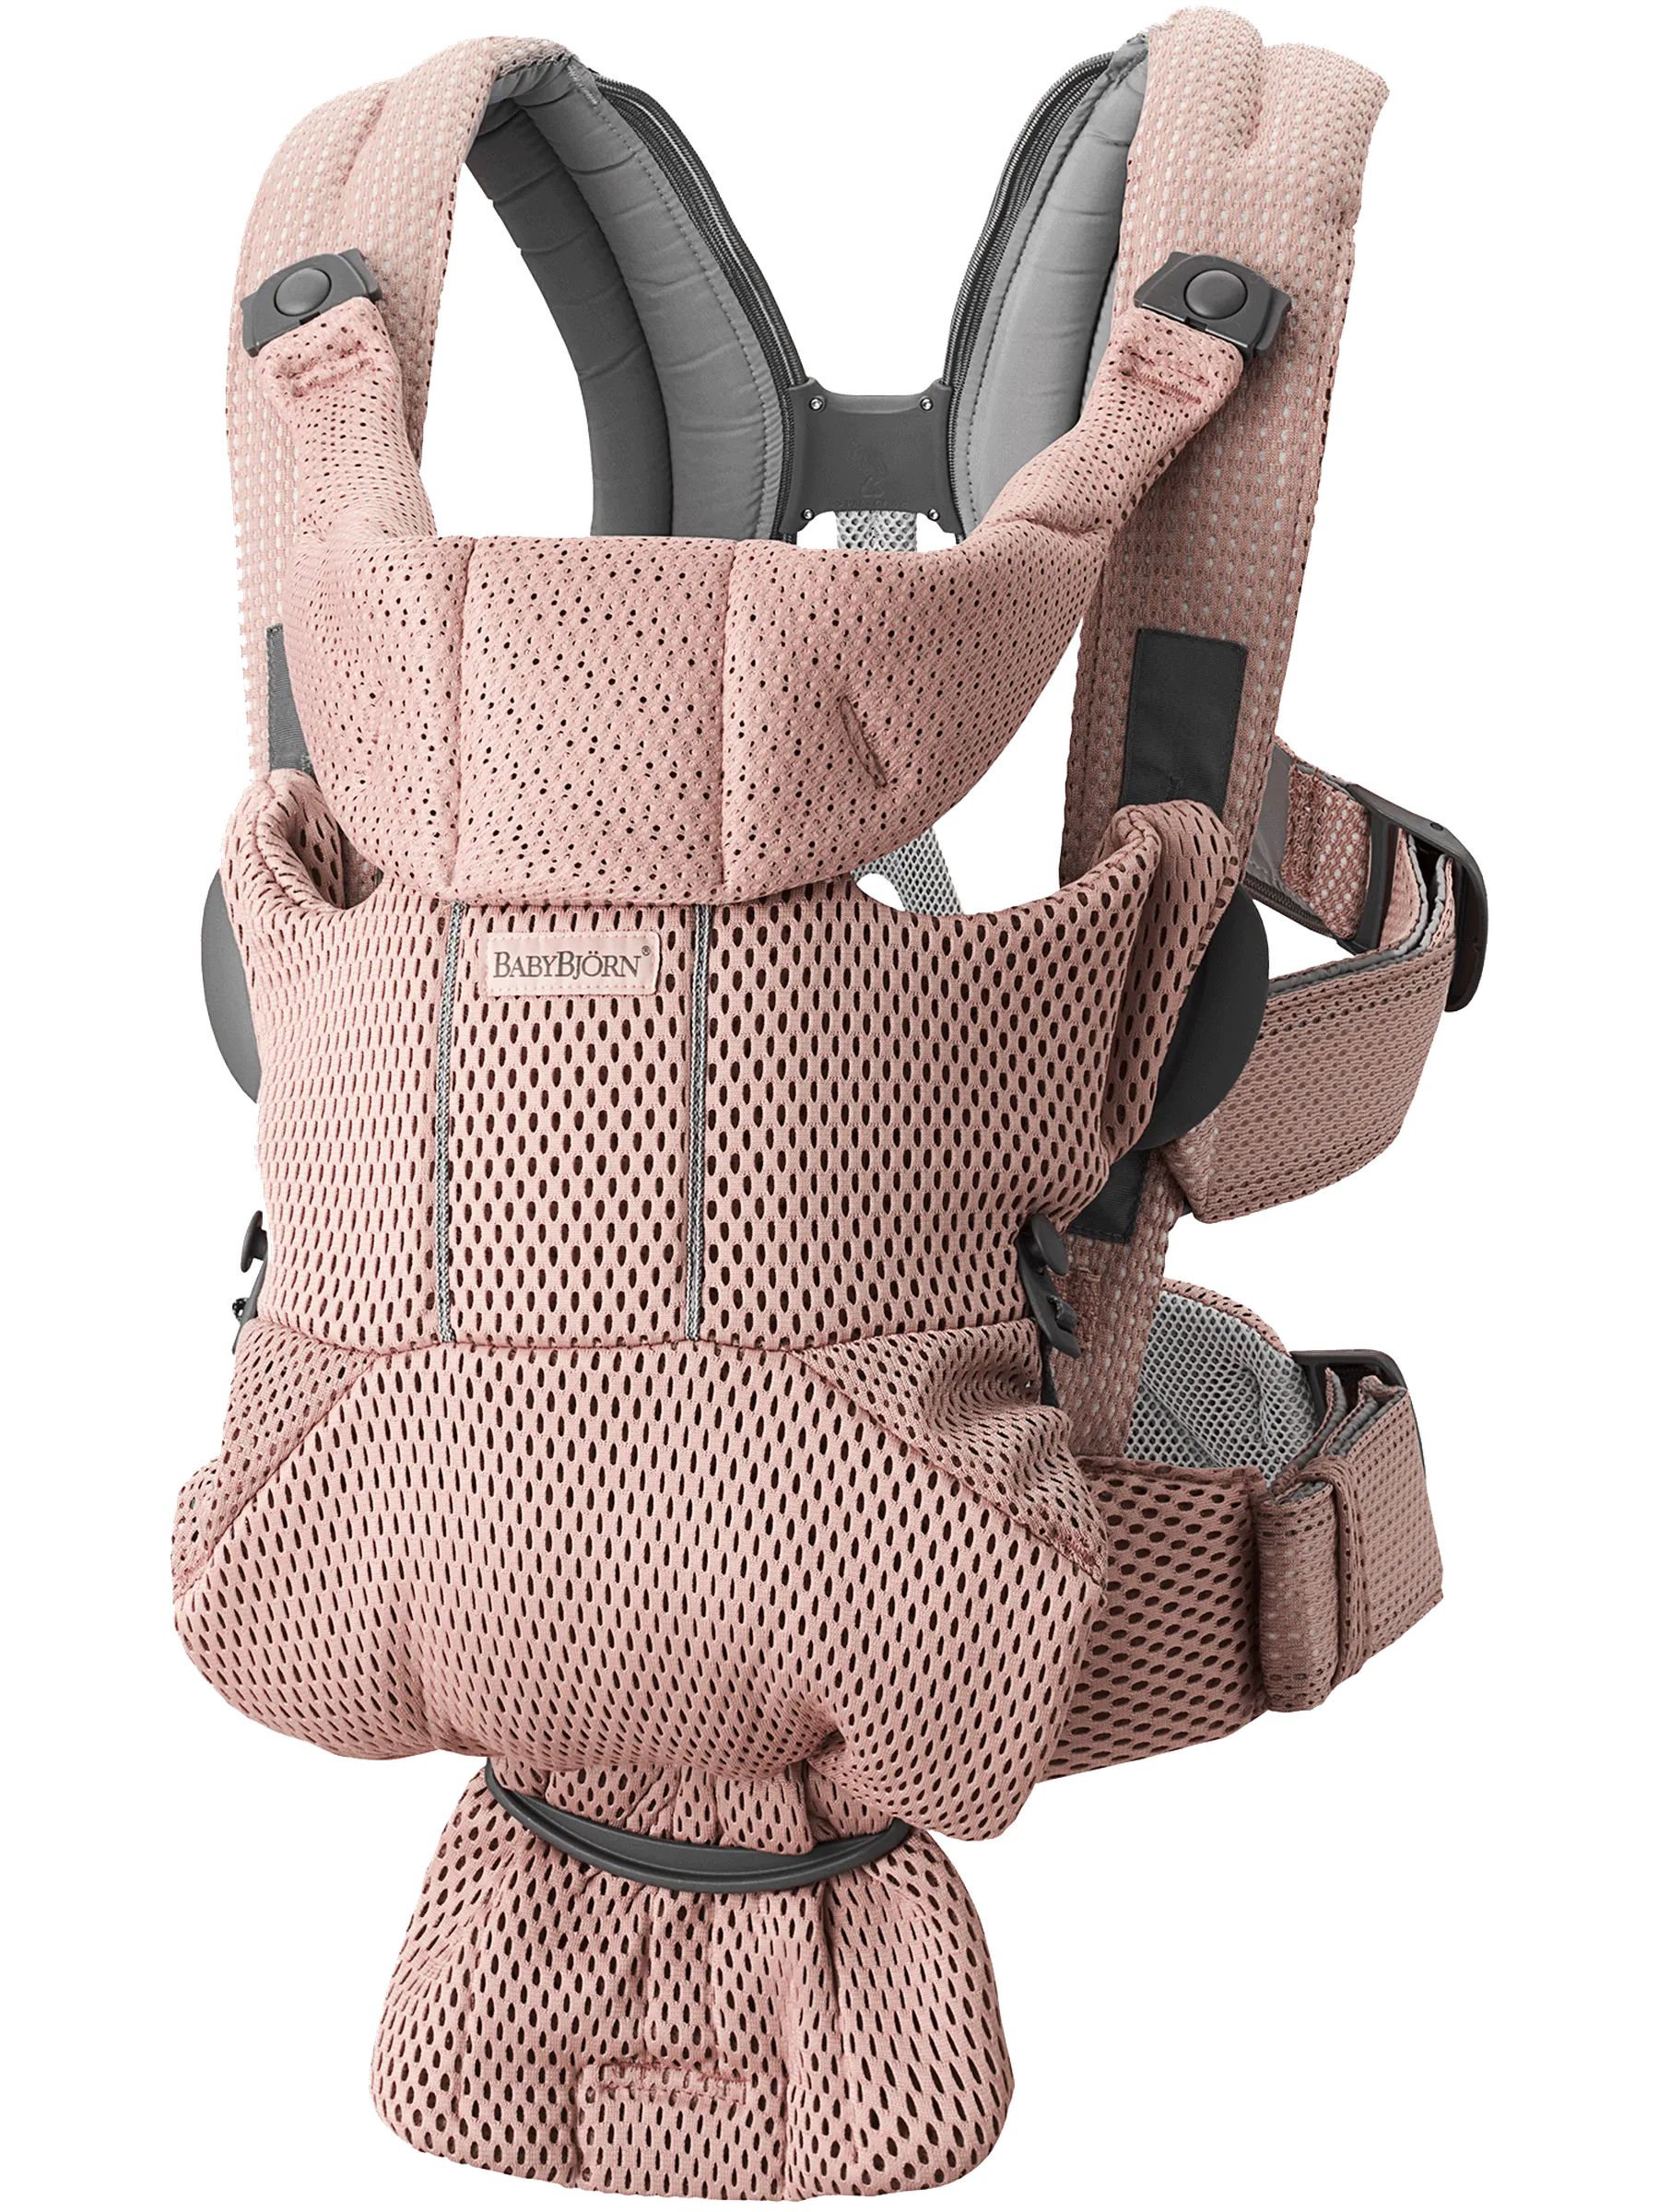 Baby Carrier Free | BabyBjorn